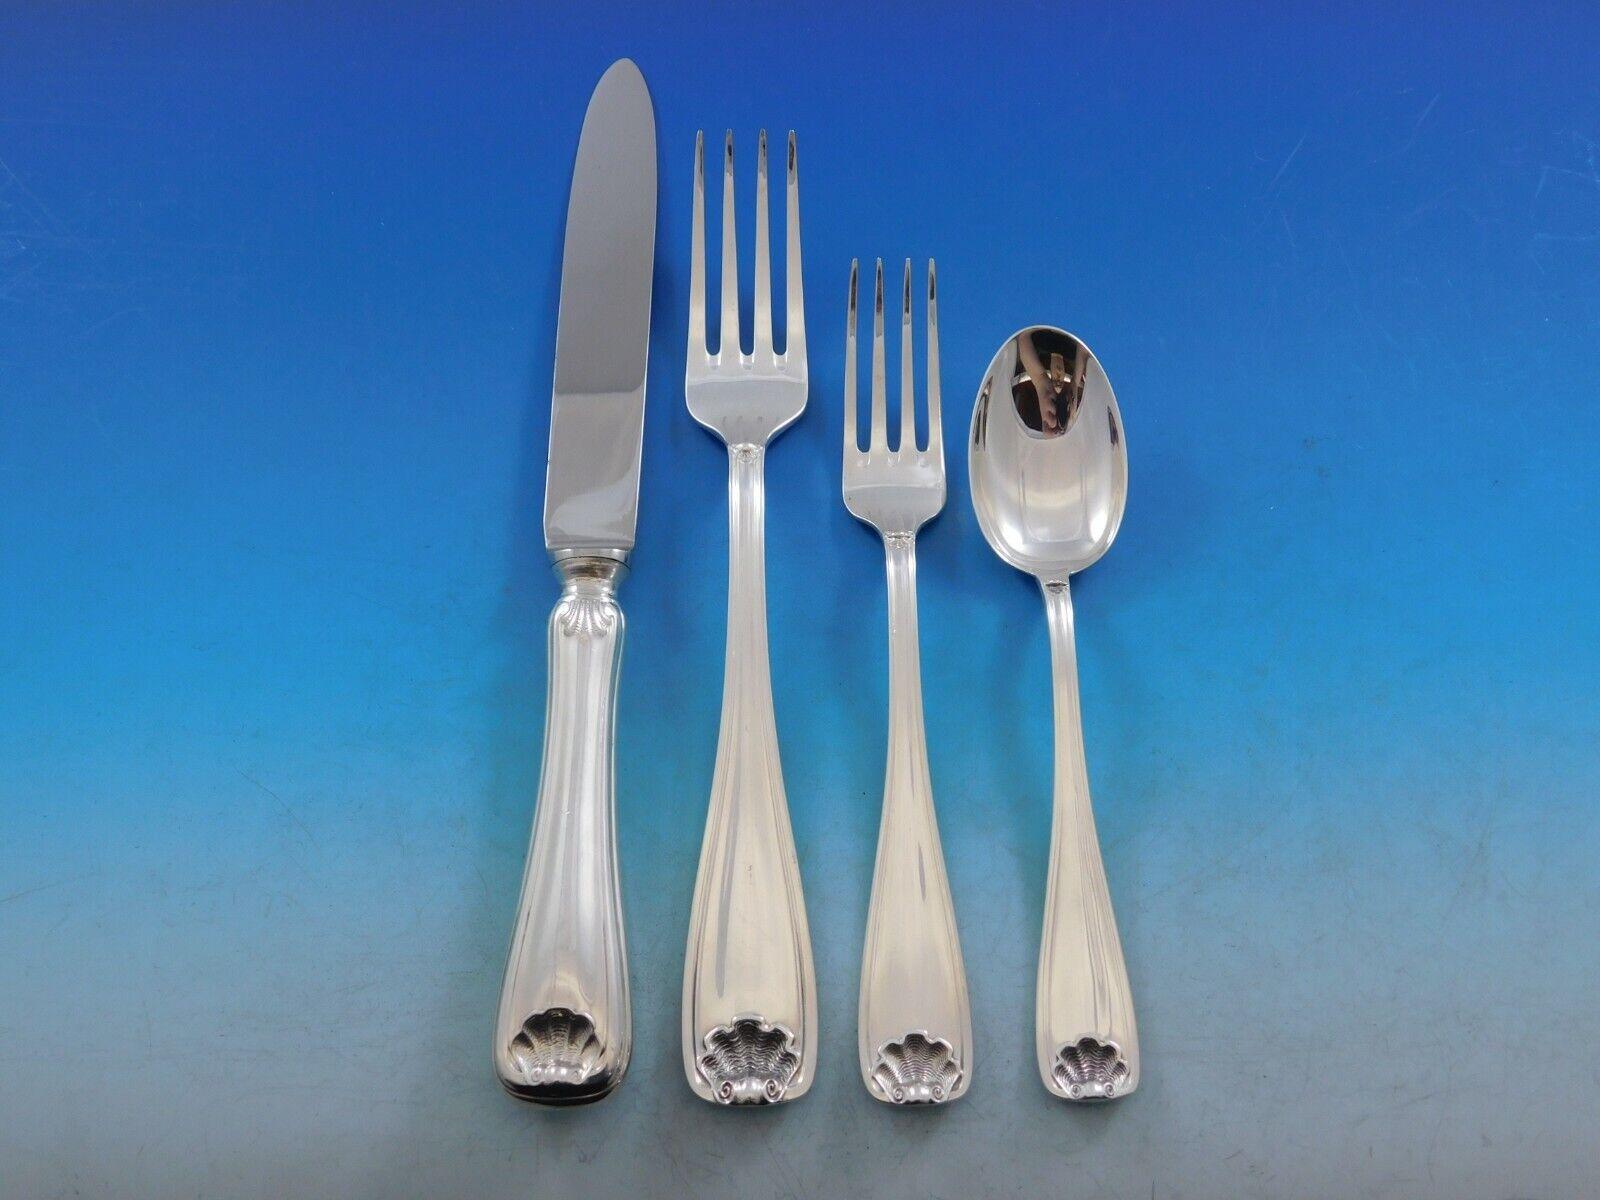 Continental size Cellini by Fortunoff Italy sterling silver flatware set, 48 pieces. This set includes:

6 Continental Size Knives, 9 1/2